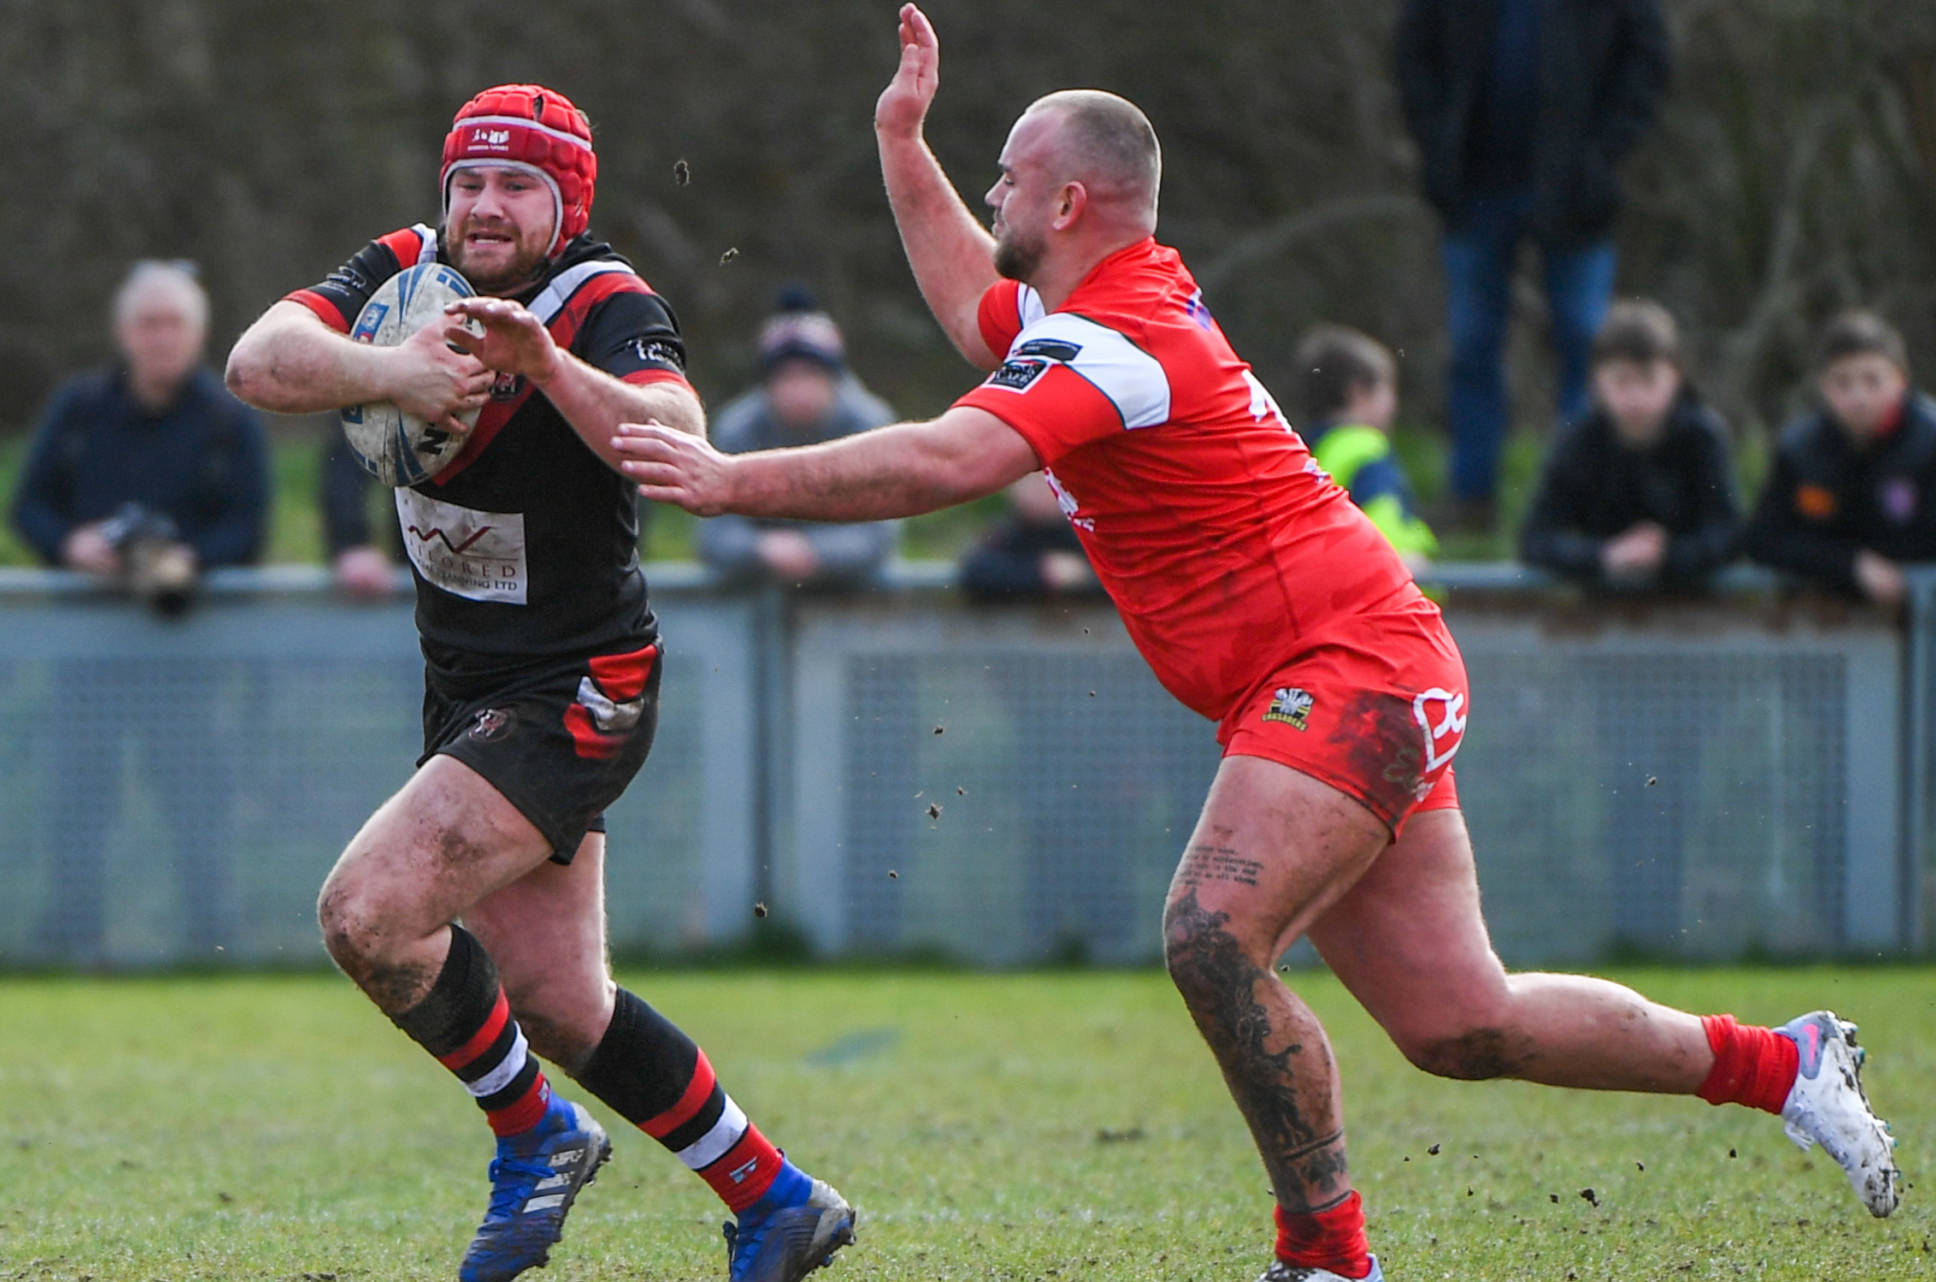 Midweek NCL - Thatto Heath Crusaders get the better of Leigh Miners Rangers